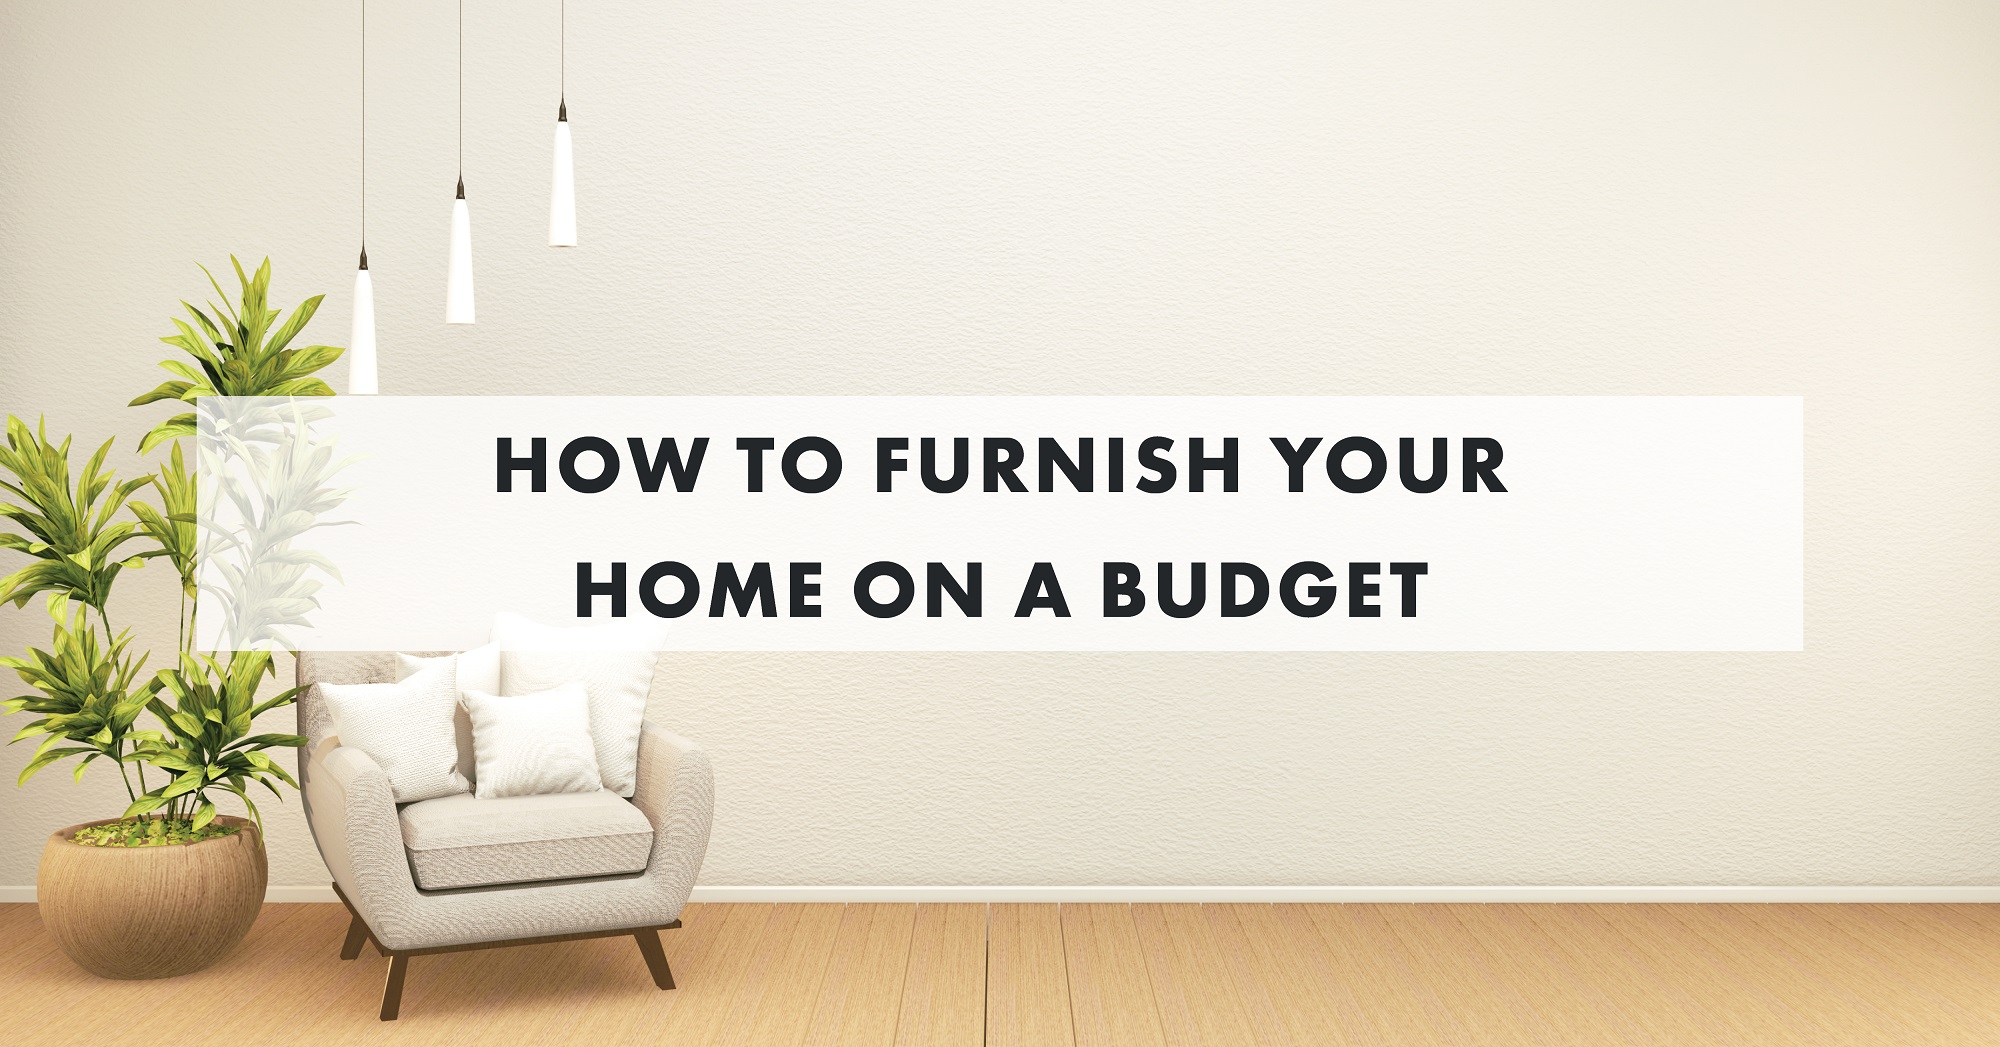 How to Furnish Your Home on a Budget - Blog Image